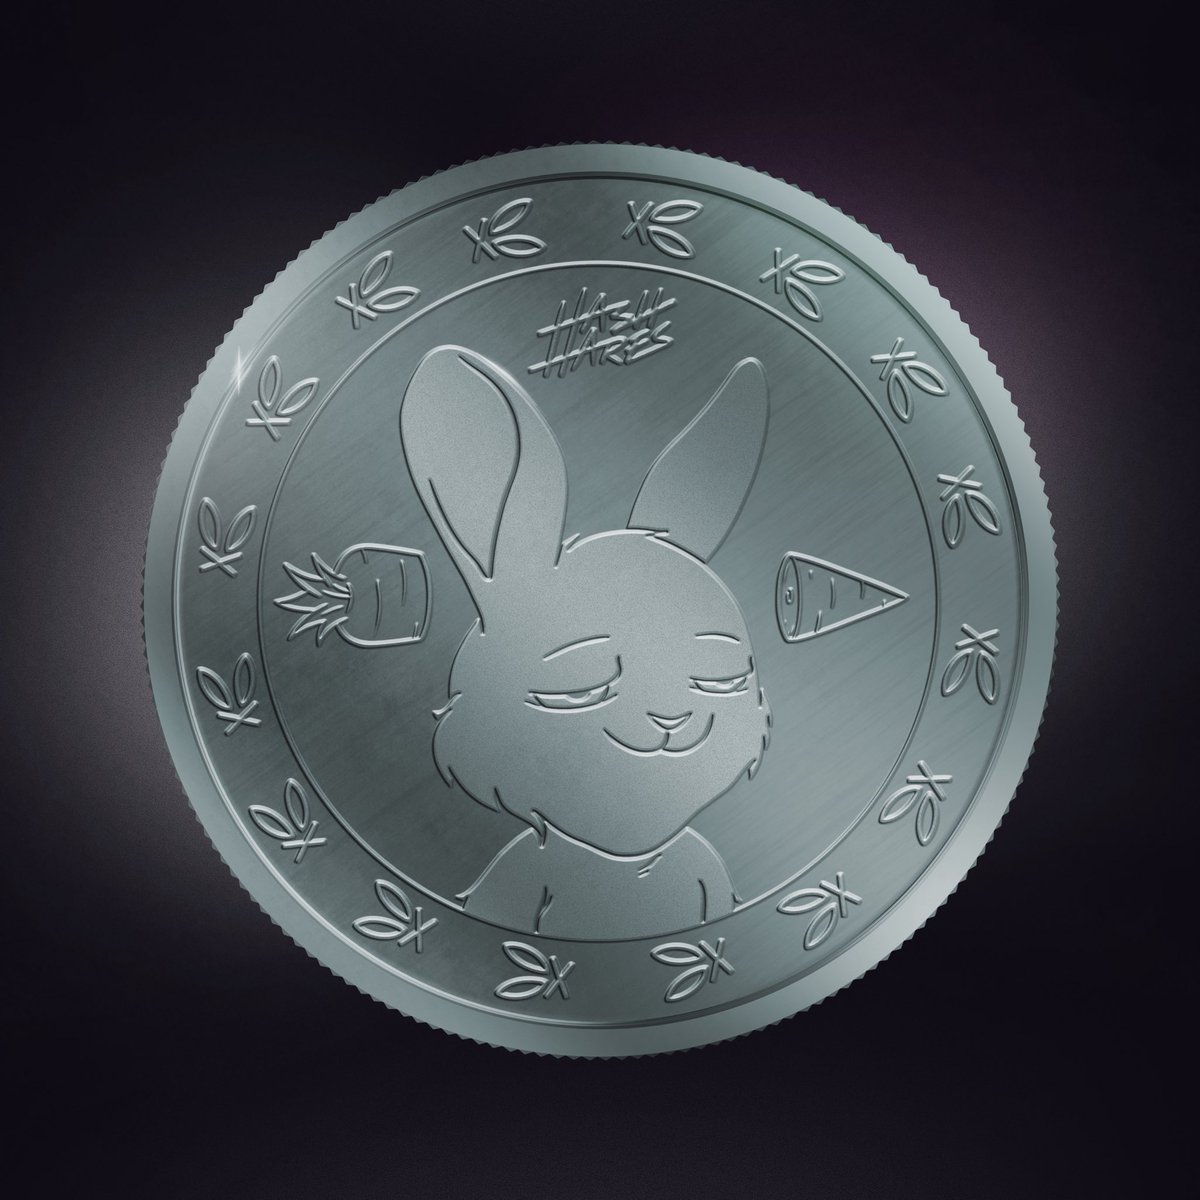 Platinum & Golden Carrot coins have blasted off for minting 💥🪙 Check project details in our discord for more information discord.gg/nxWtQFG7 To celebrate the reveal we have a Carrot Coin giveaway🥕🪙 To enter: ❤️ & Follow Retweet Tag 3️⃣ friends 48h ⏰ LFG Hares 🚀